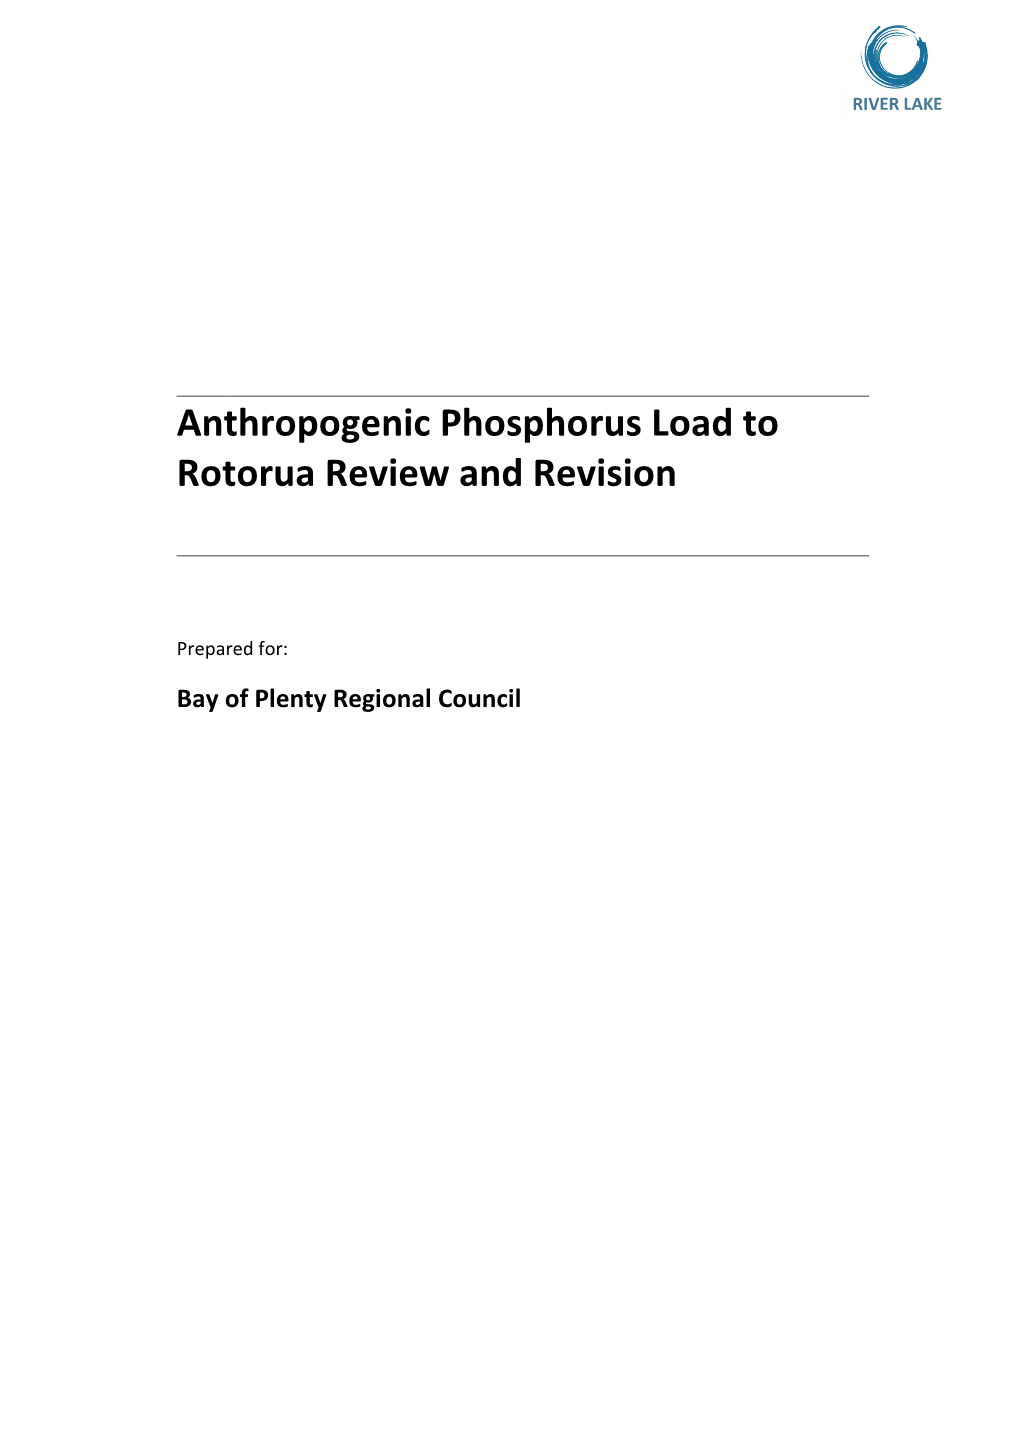 Anthropogenic Phosphorus Load to Lake Rotorua (2007-2014) Assuming Drainage Factor D2 and Accounting for Geothermal Inputs